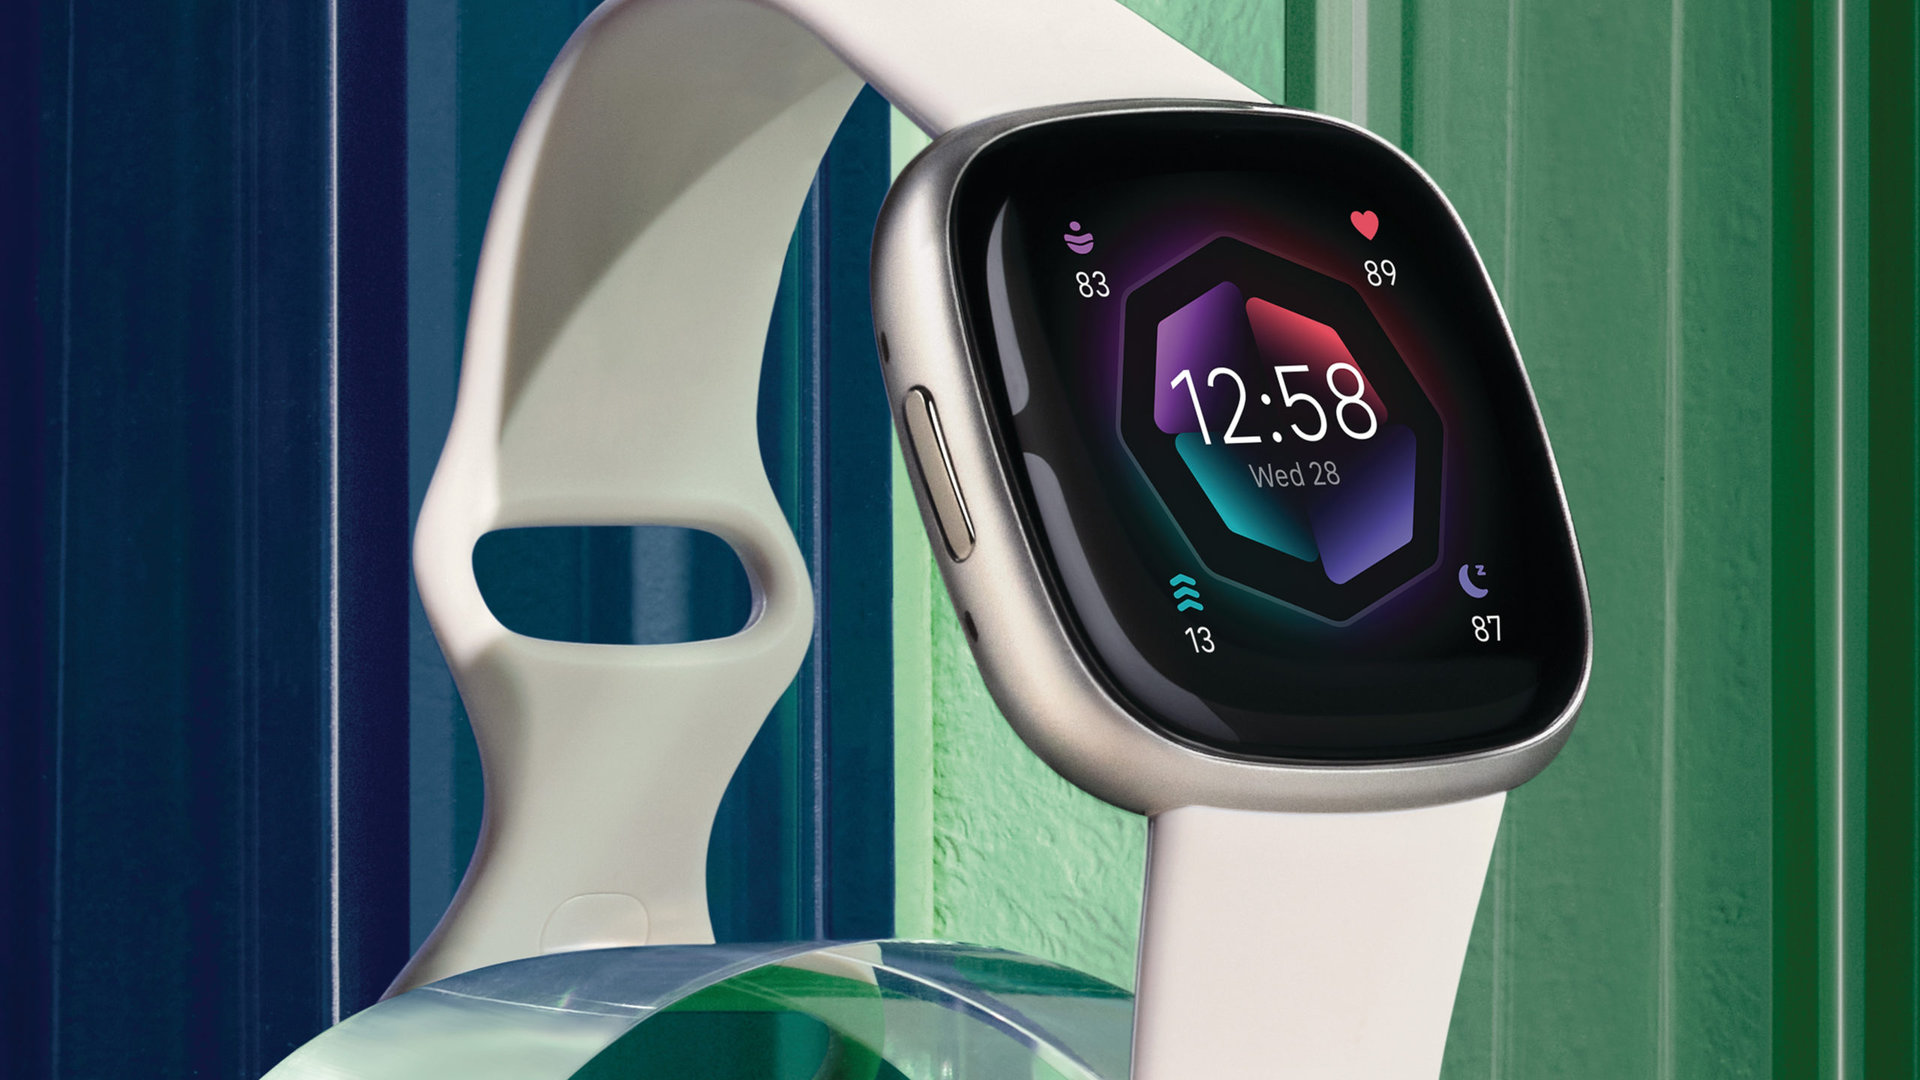 A Fitbit Sense 2 in Lunar White is featured against a graphic green and blue background.